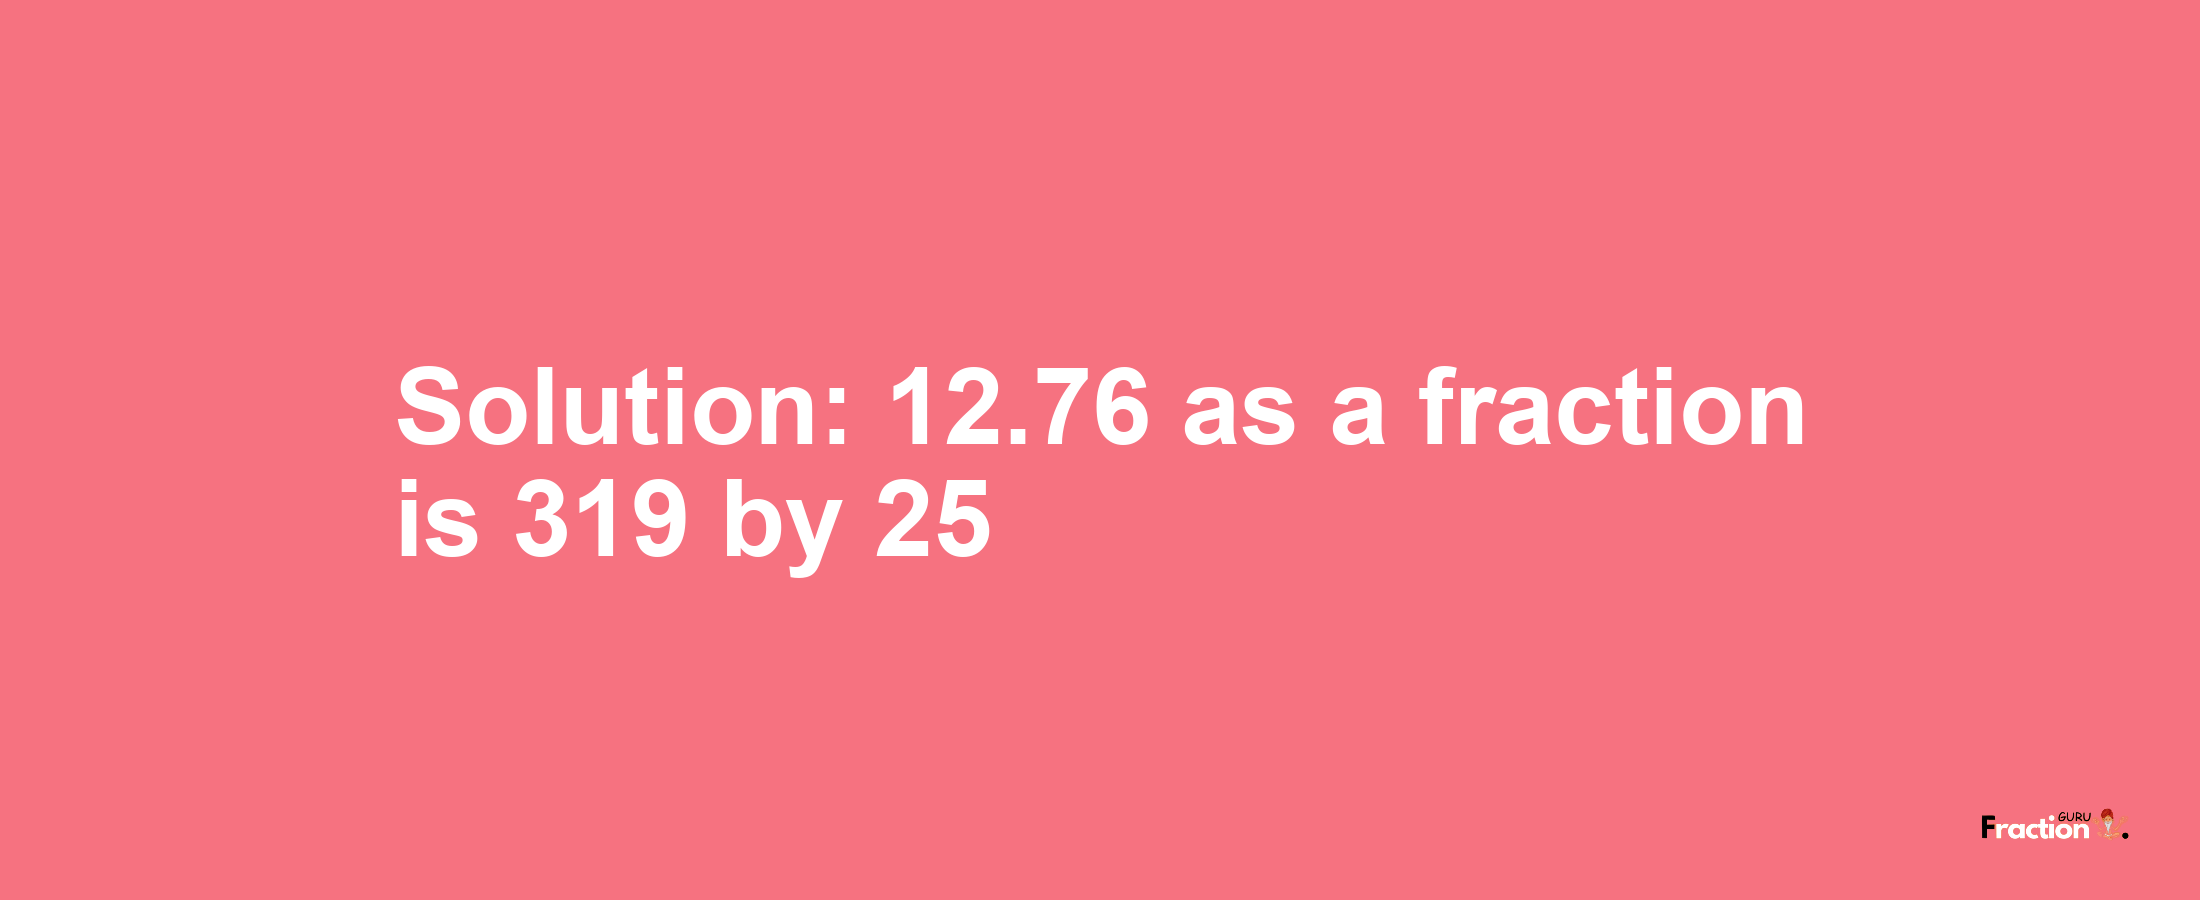 Solution:12.76 as a fraction is 319/25